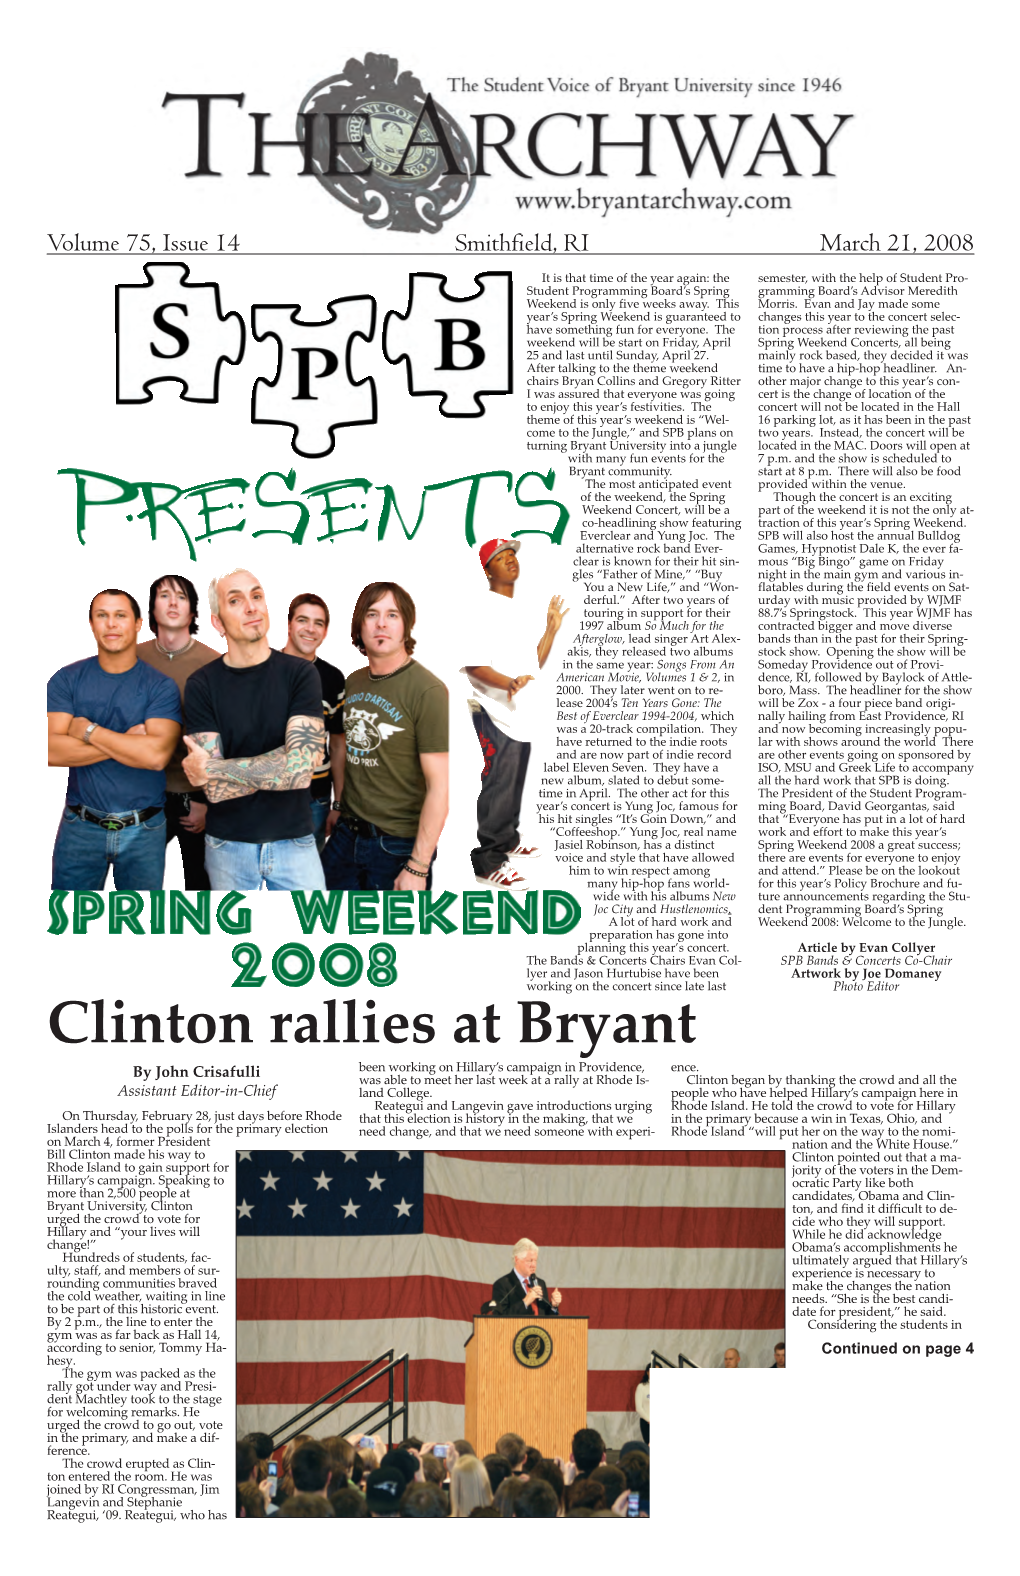 V. 75, Issue 14, March 21, 2008